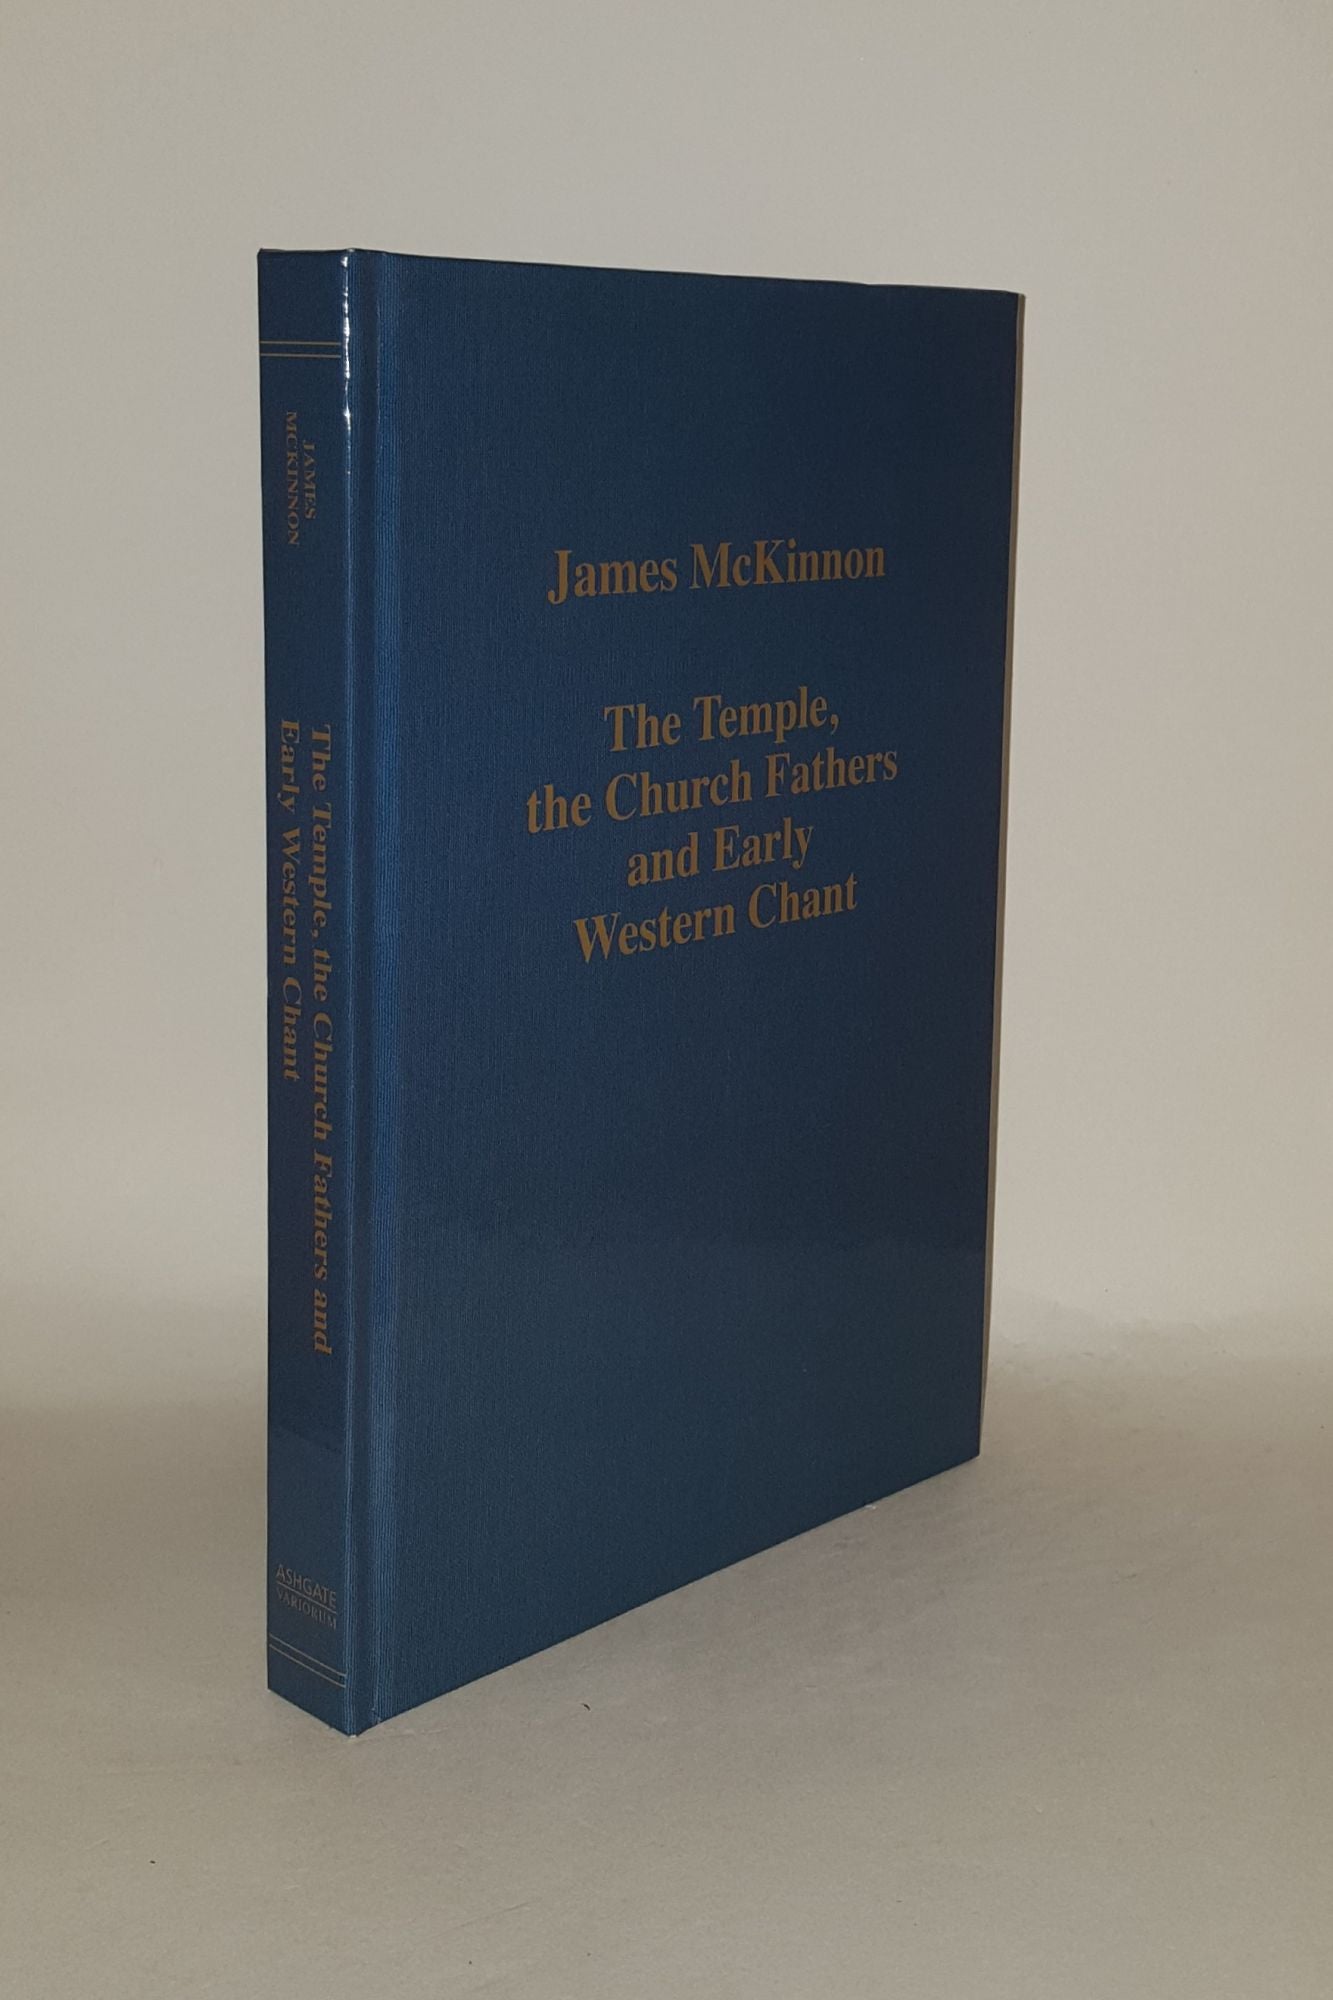 McKINNON James - The Temple the Church Fathers and Early Western Chant